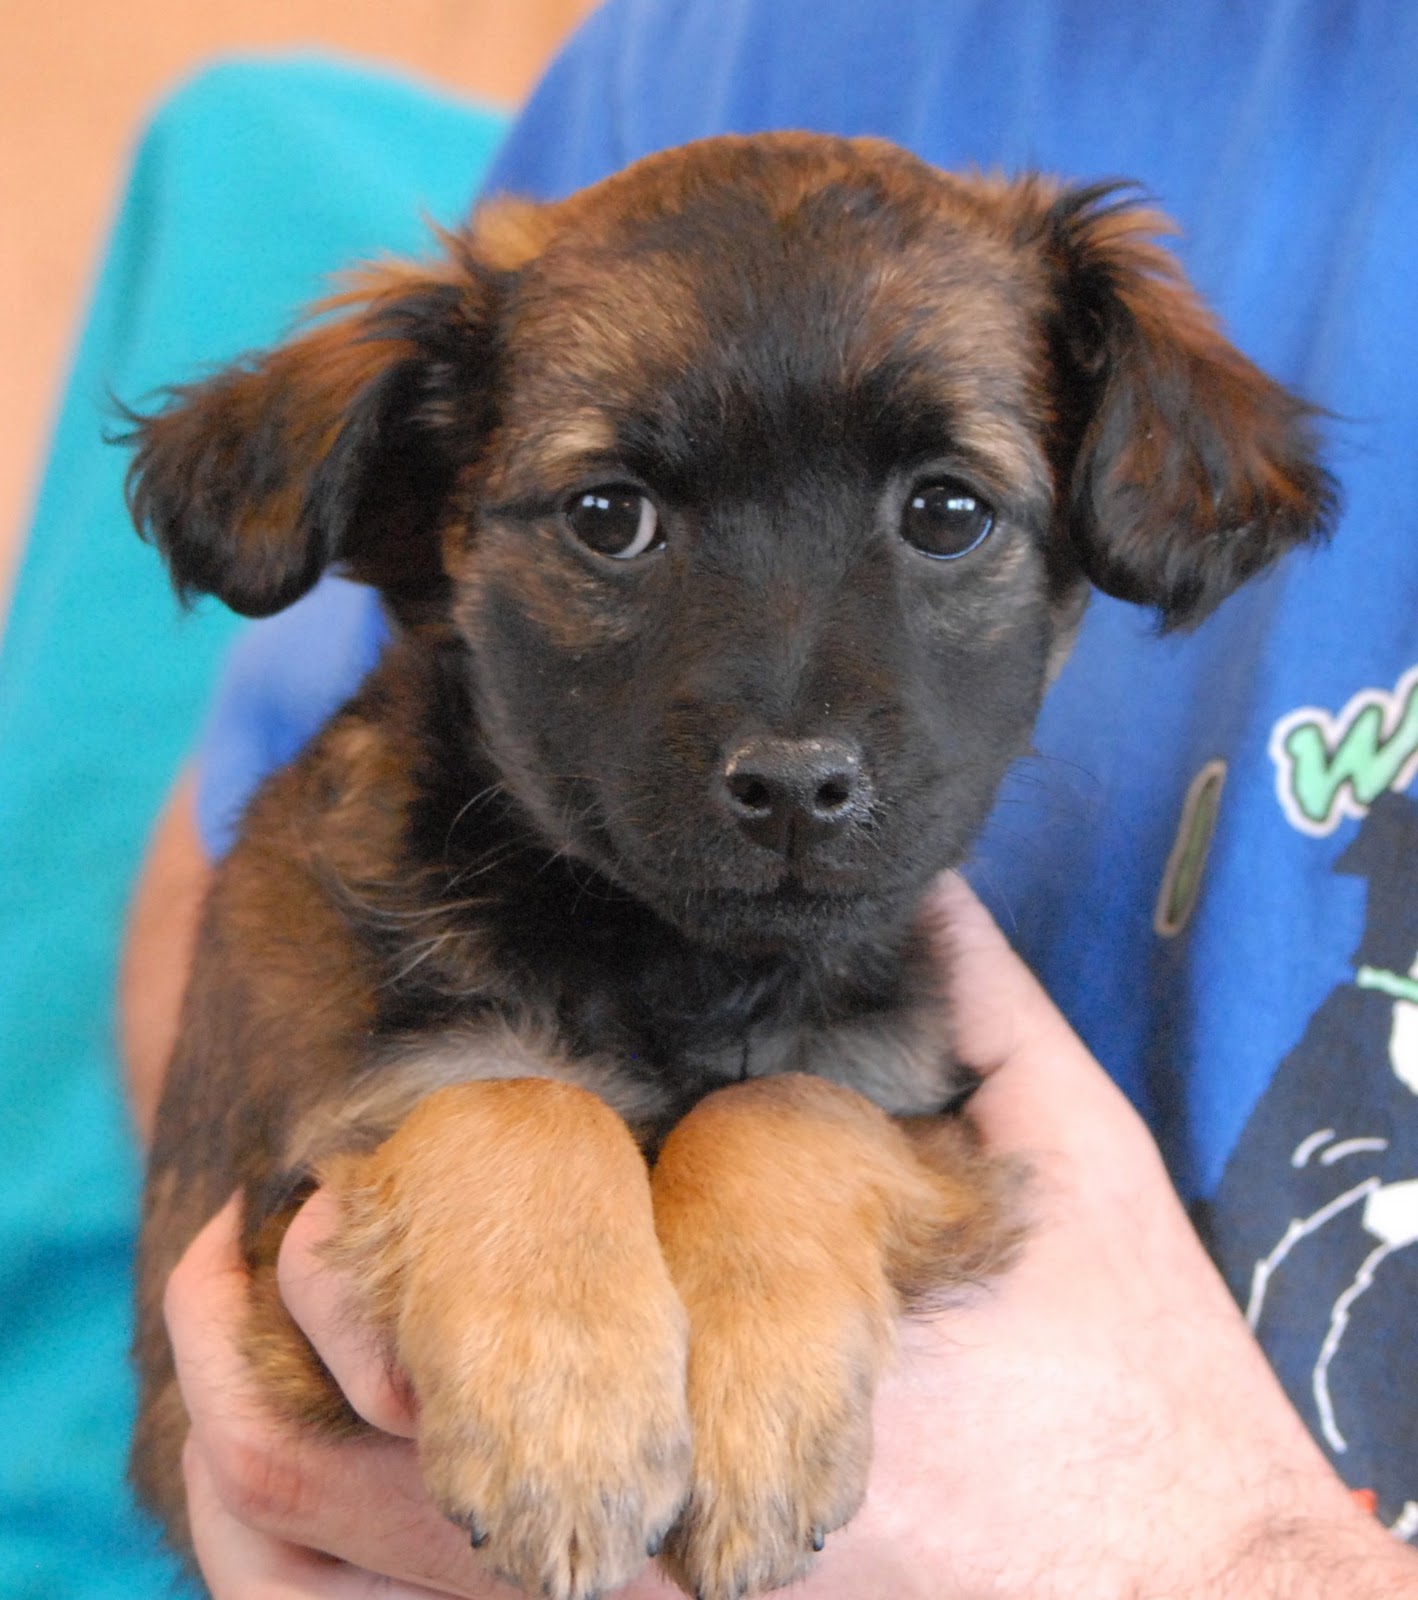 3 adorable Poodle mix puppies debuting for adoption.